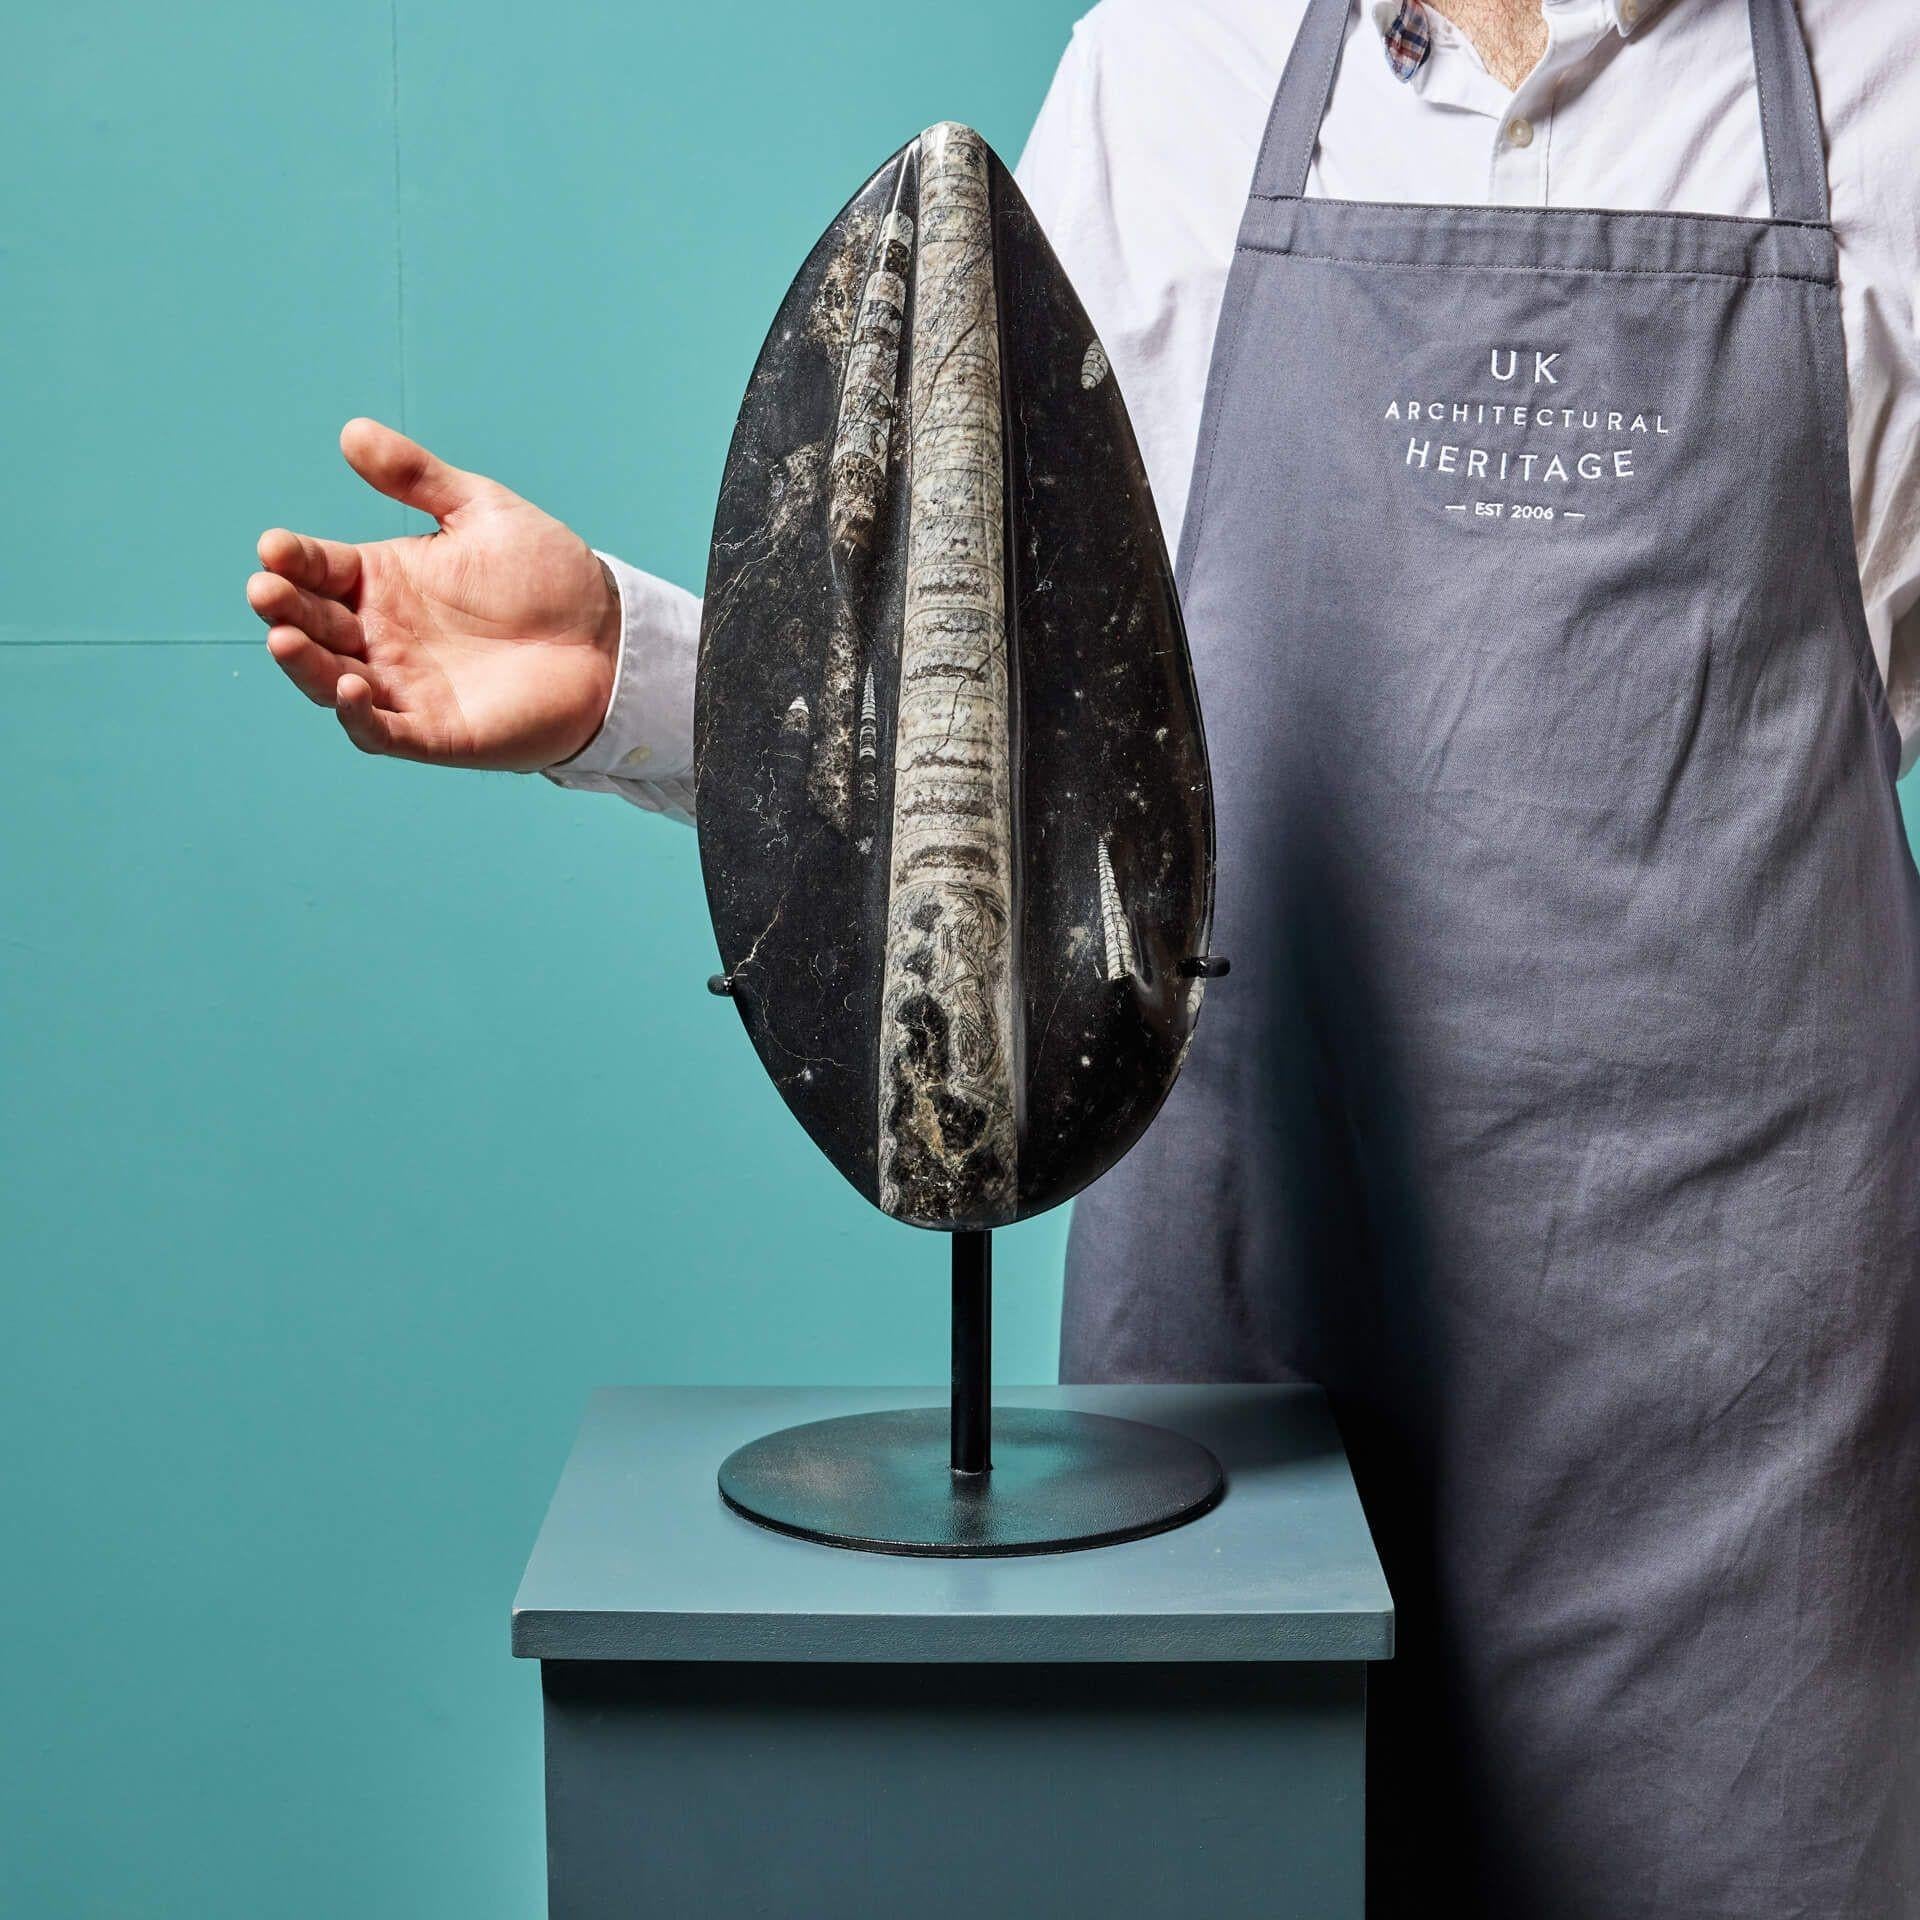 A natural prehistoric polished Orthoceras fossil panel mounted on a bespoke steel stand. Characterised by its long, straight conical shaped shell, the 370-million-year-old Orthoceras was an ancient cephalopod (mollusk) and ancestor to the modern-day